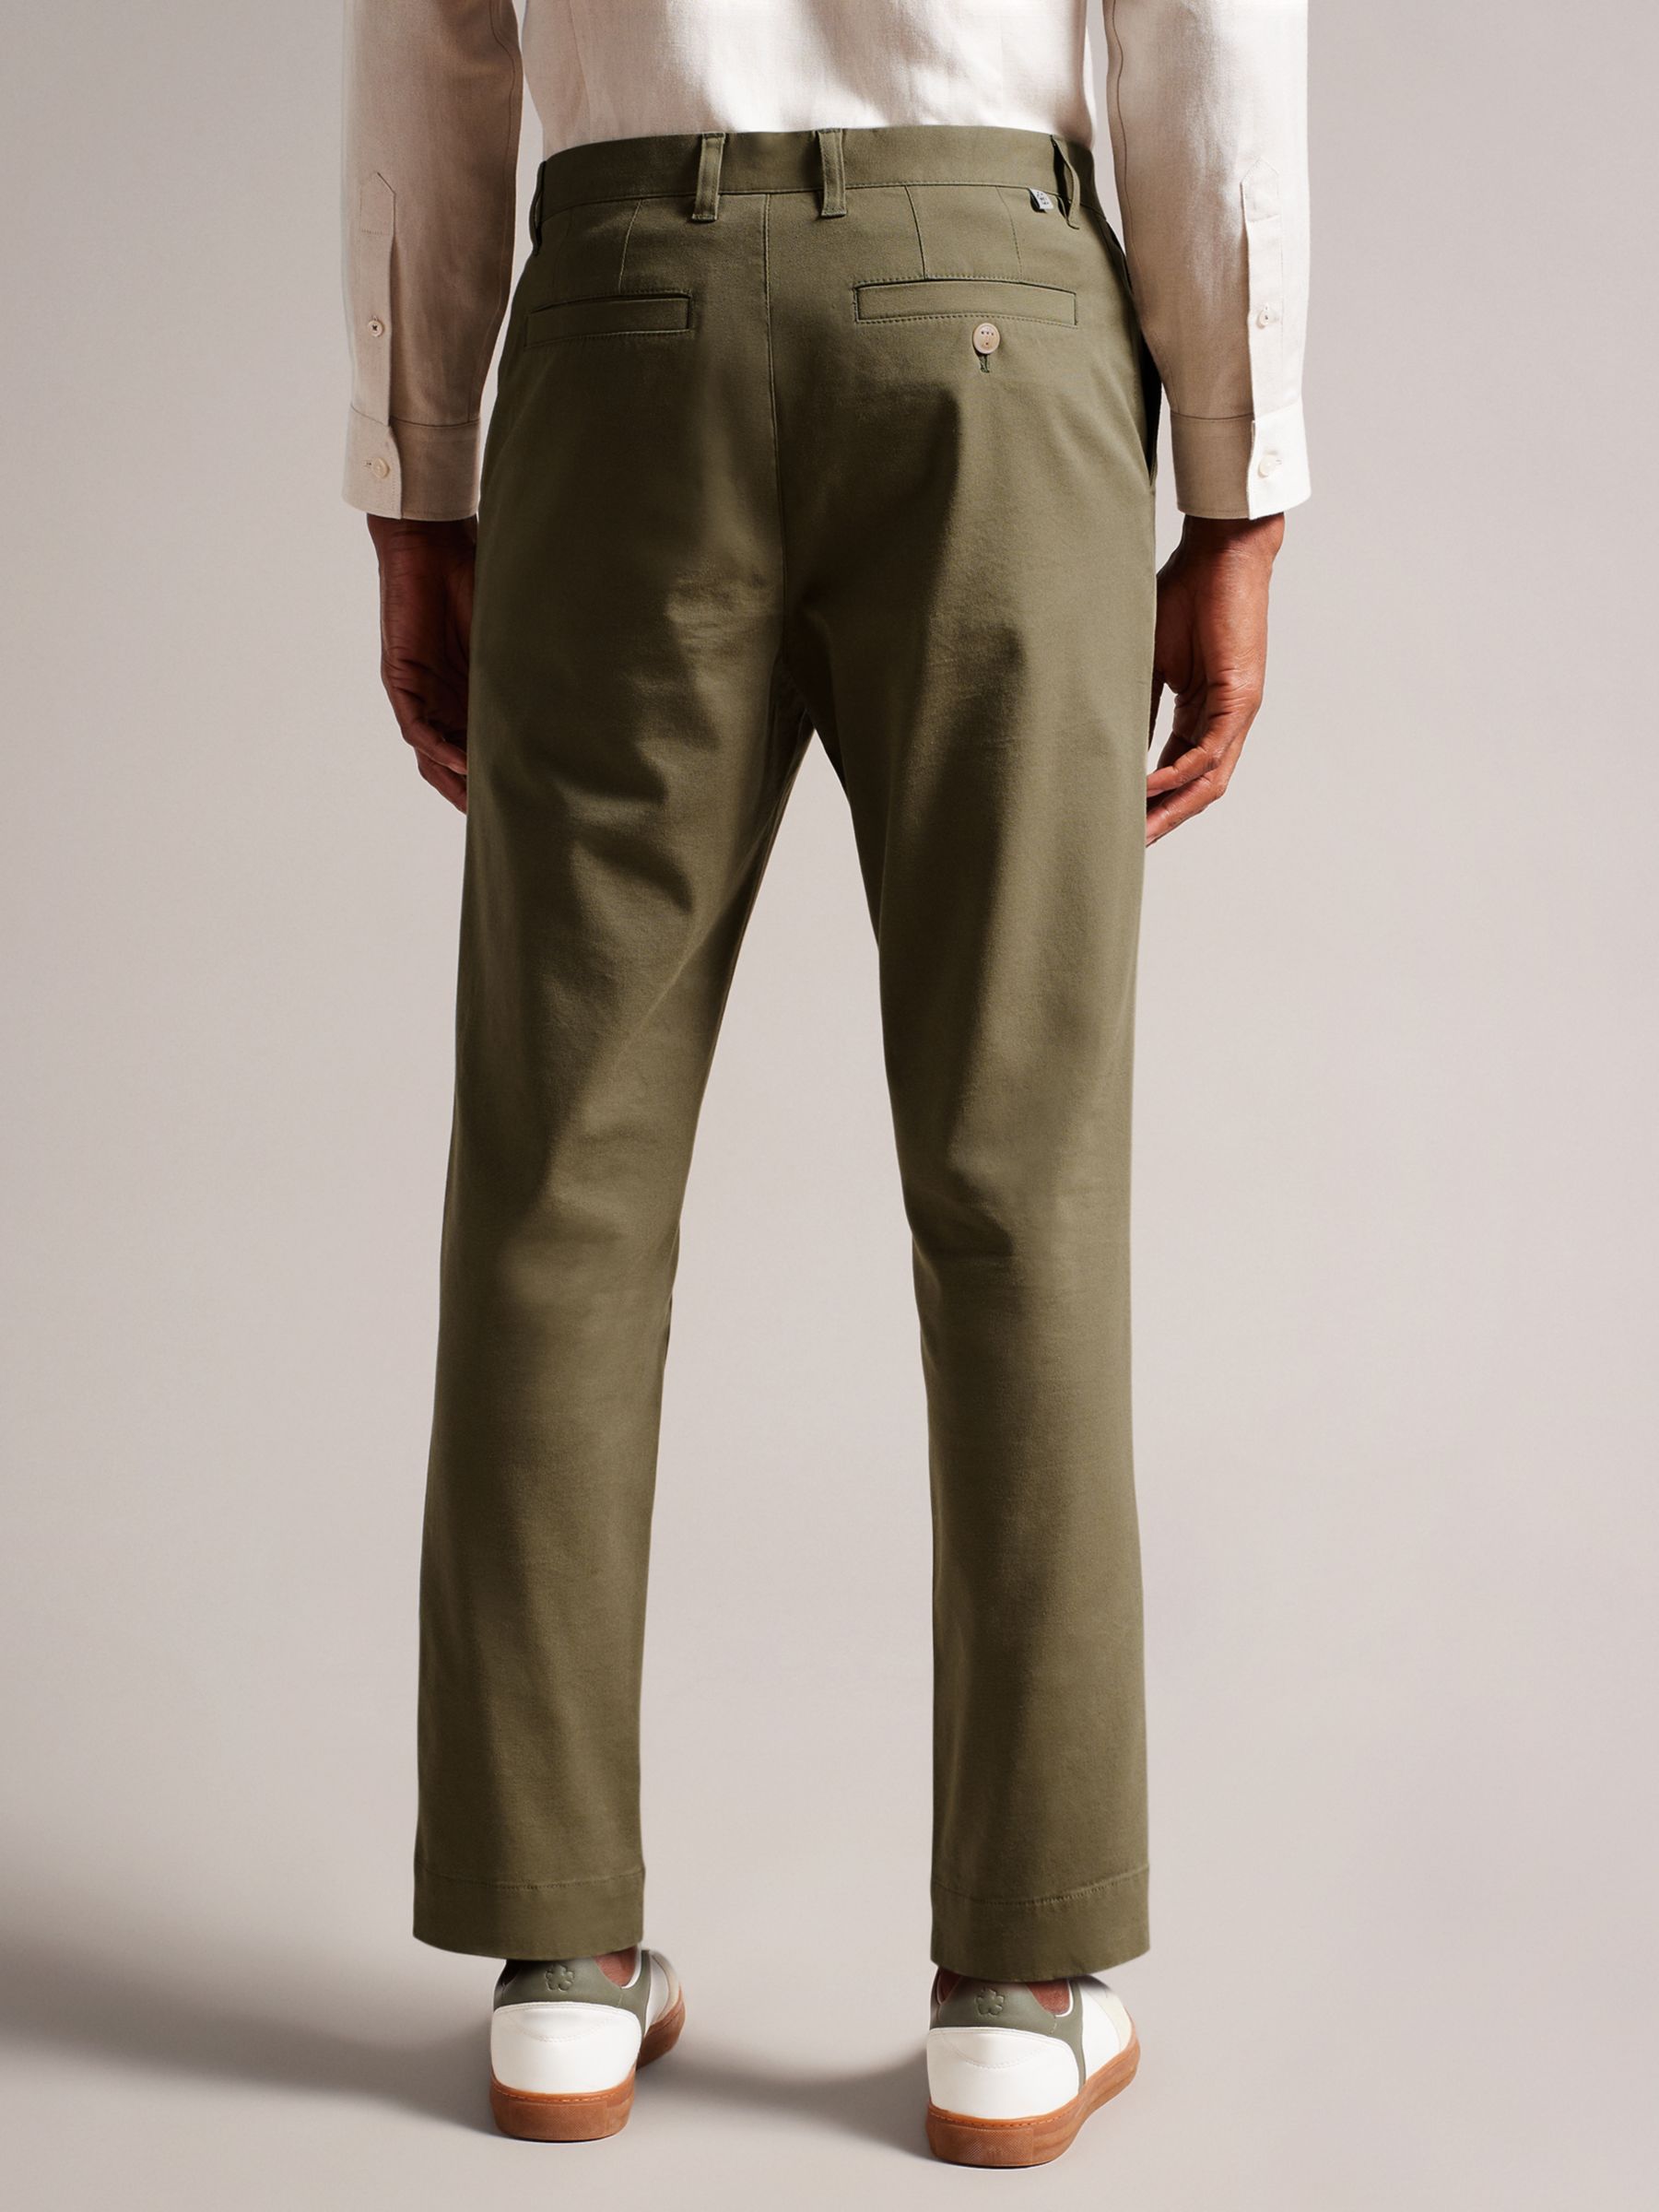 Ted Baker Genbee Casual Chino Trousers, Olive at John Lewis & Partners